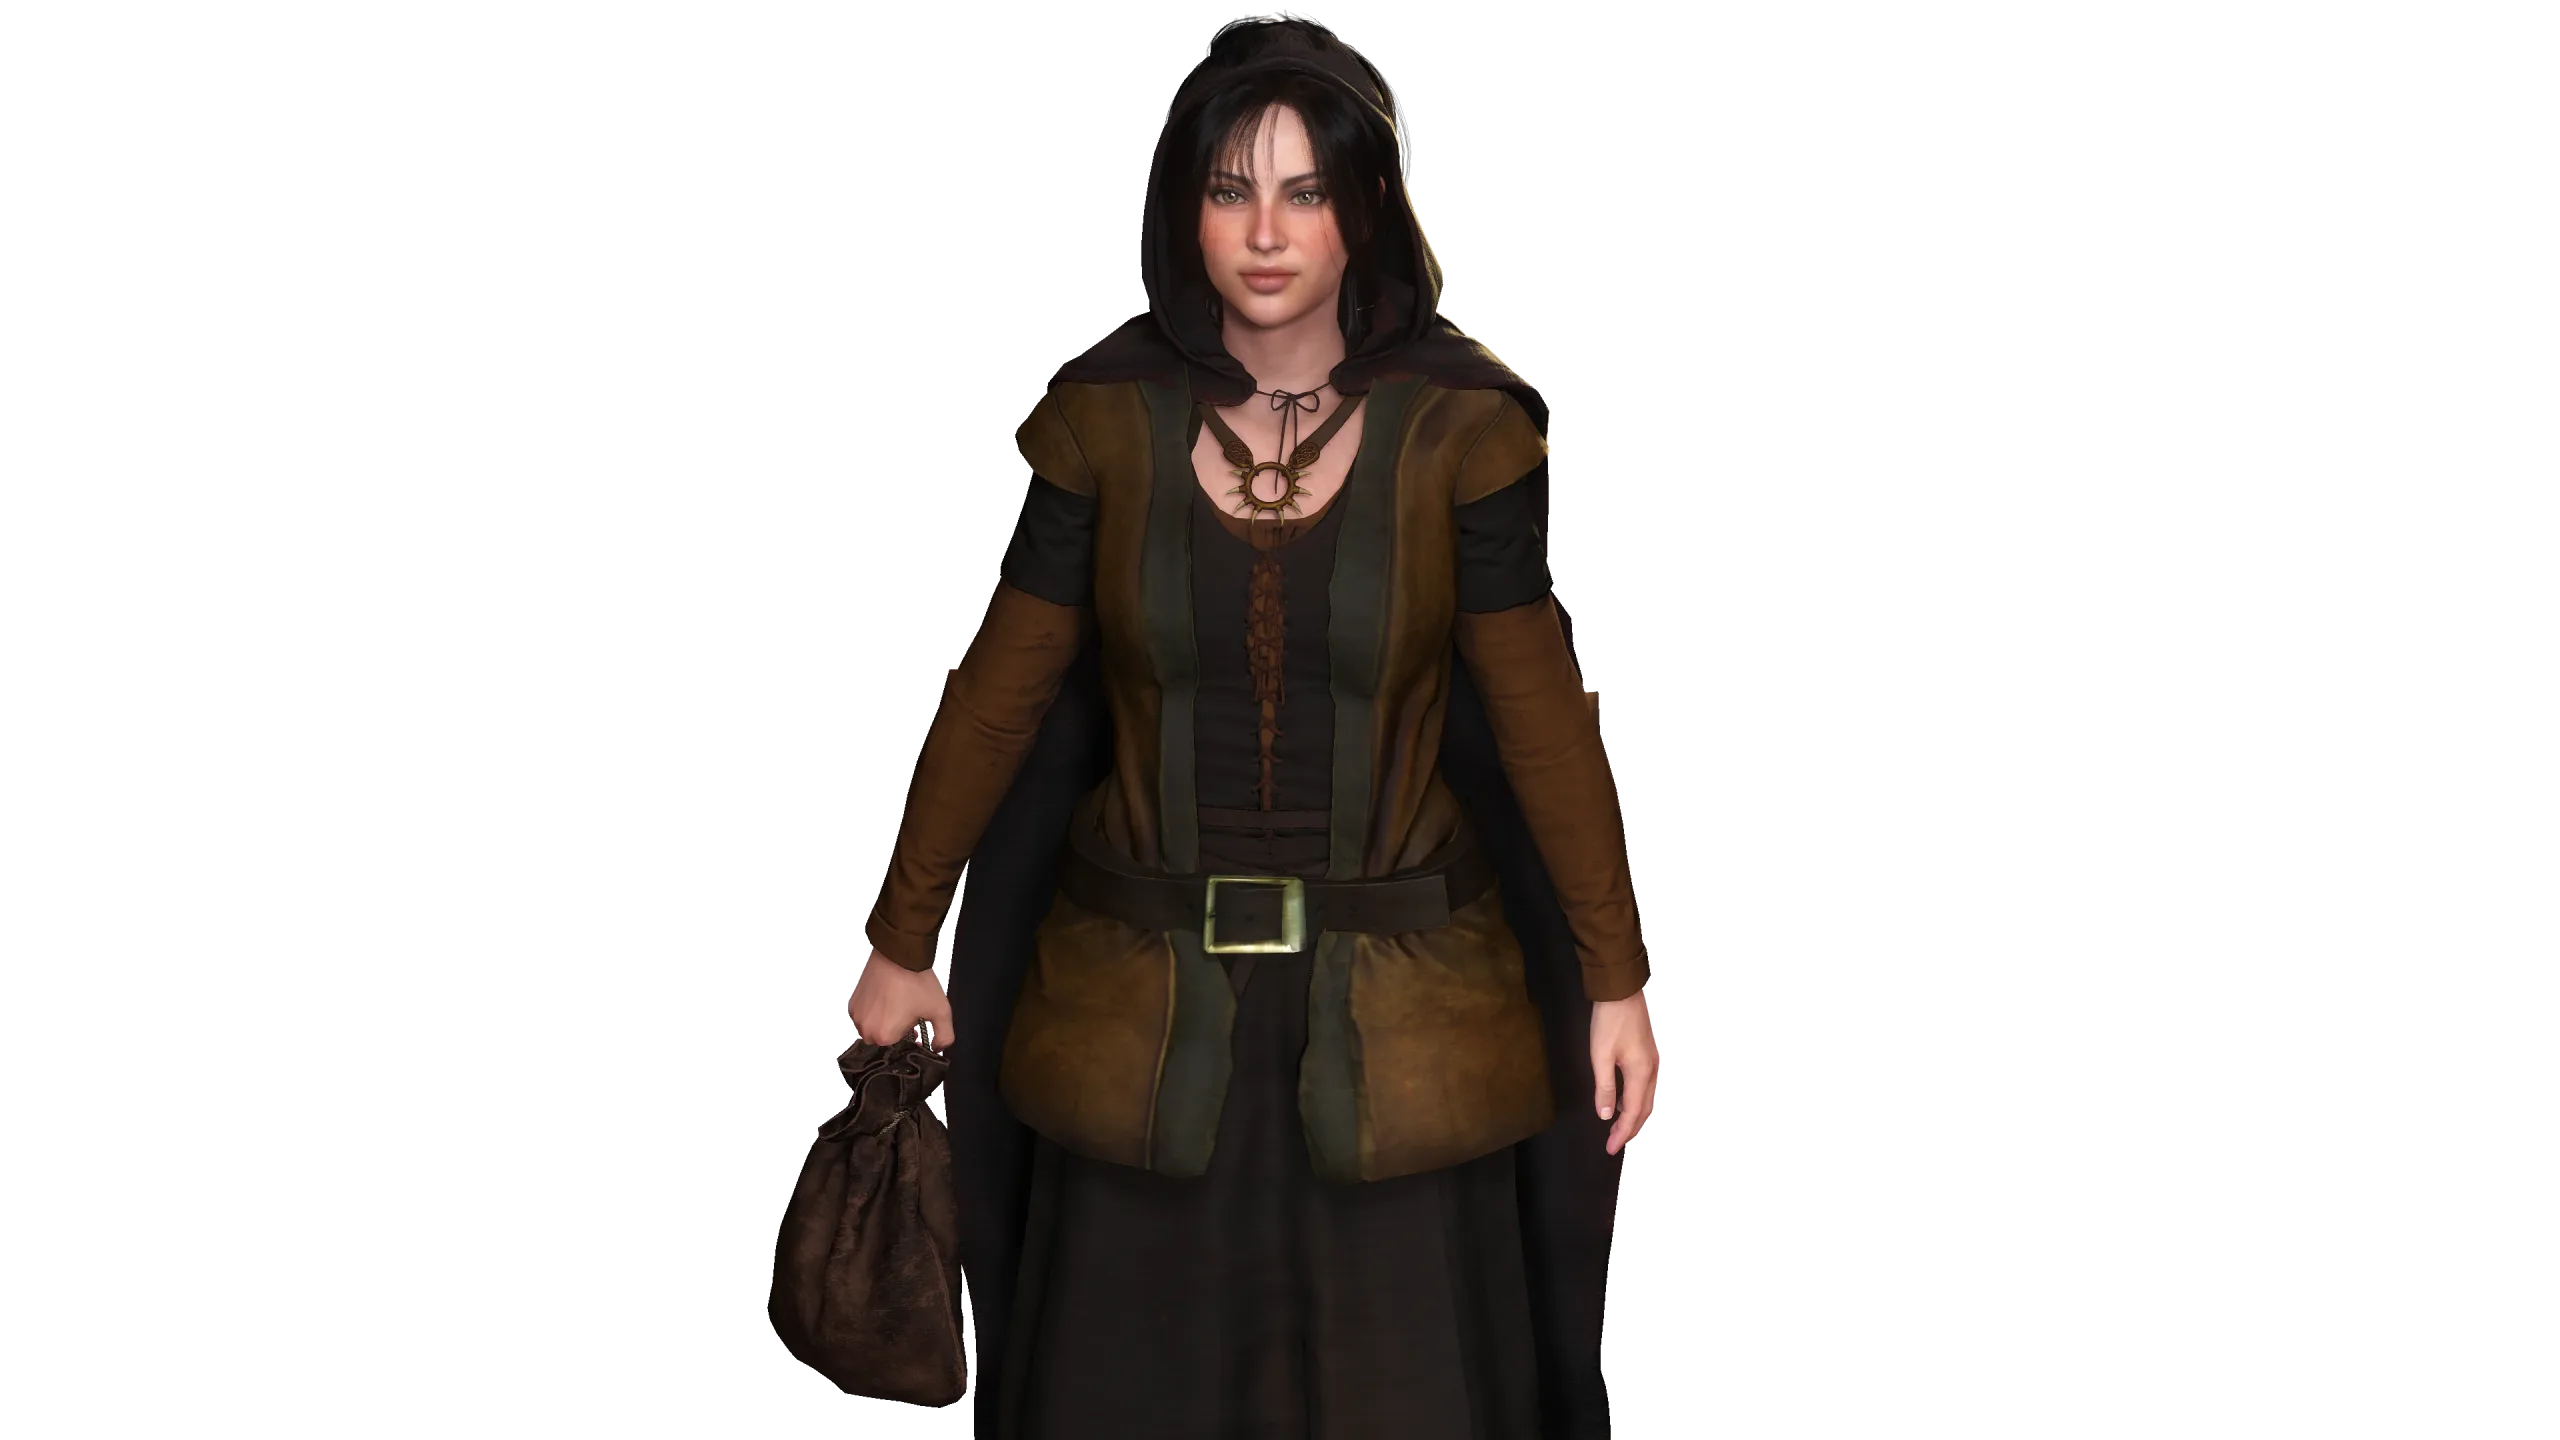 AAA 3D FANTASY MEDIEVAL CHARACTER-REALISTIC YOUNG GIRL